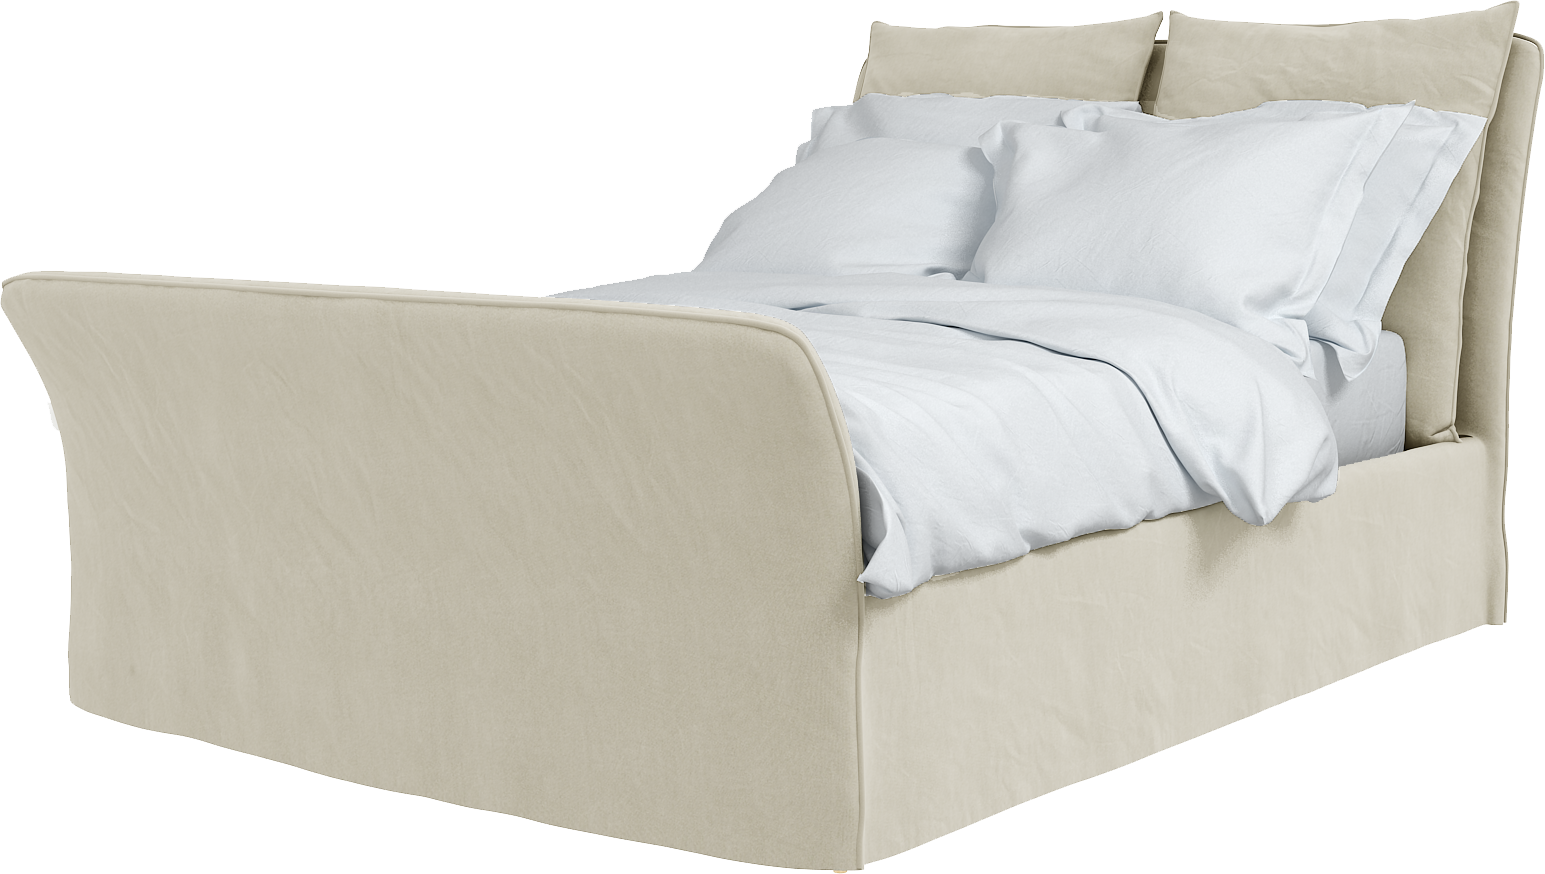 Maker&Son Bed King Marnie Piped Edge Sunstone Beige